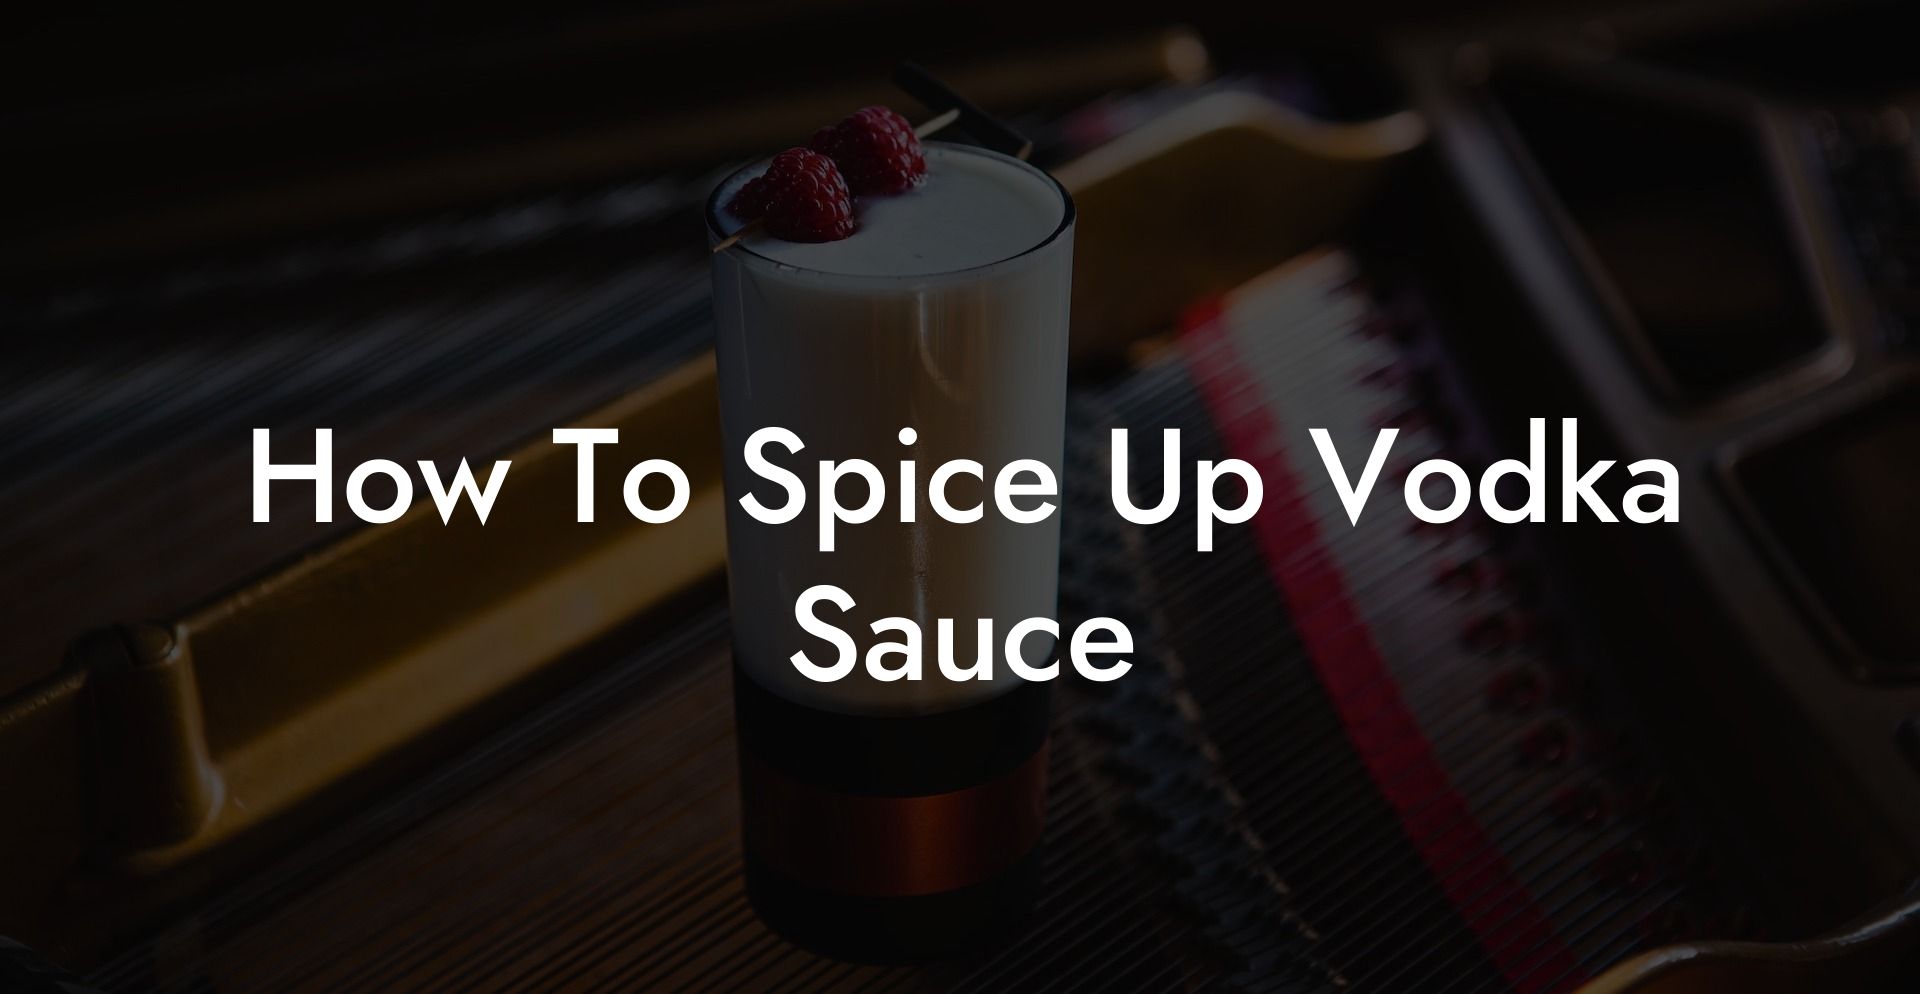 How To Spice Up Vodka Sauce